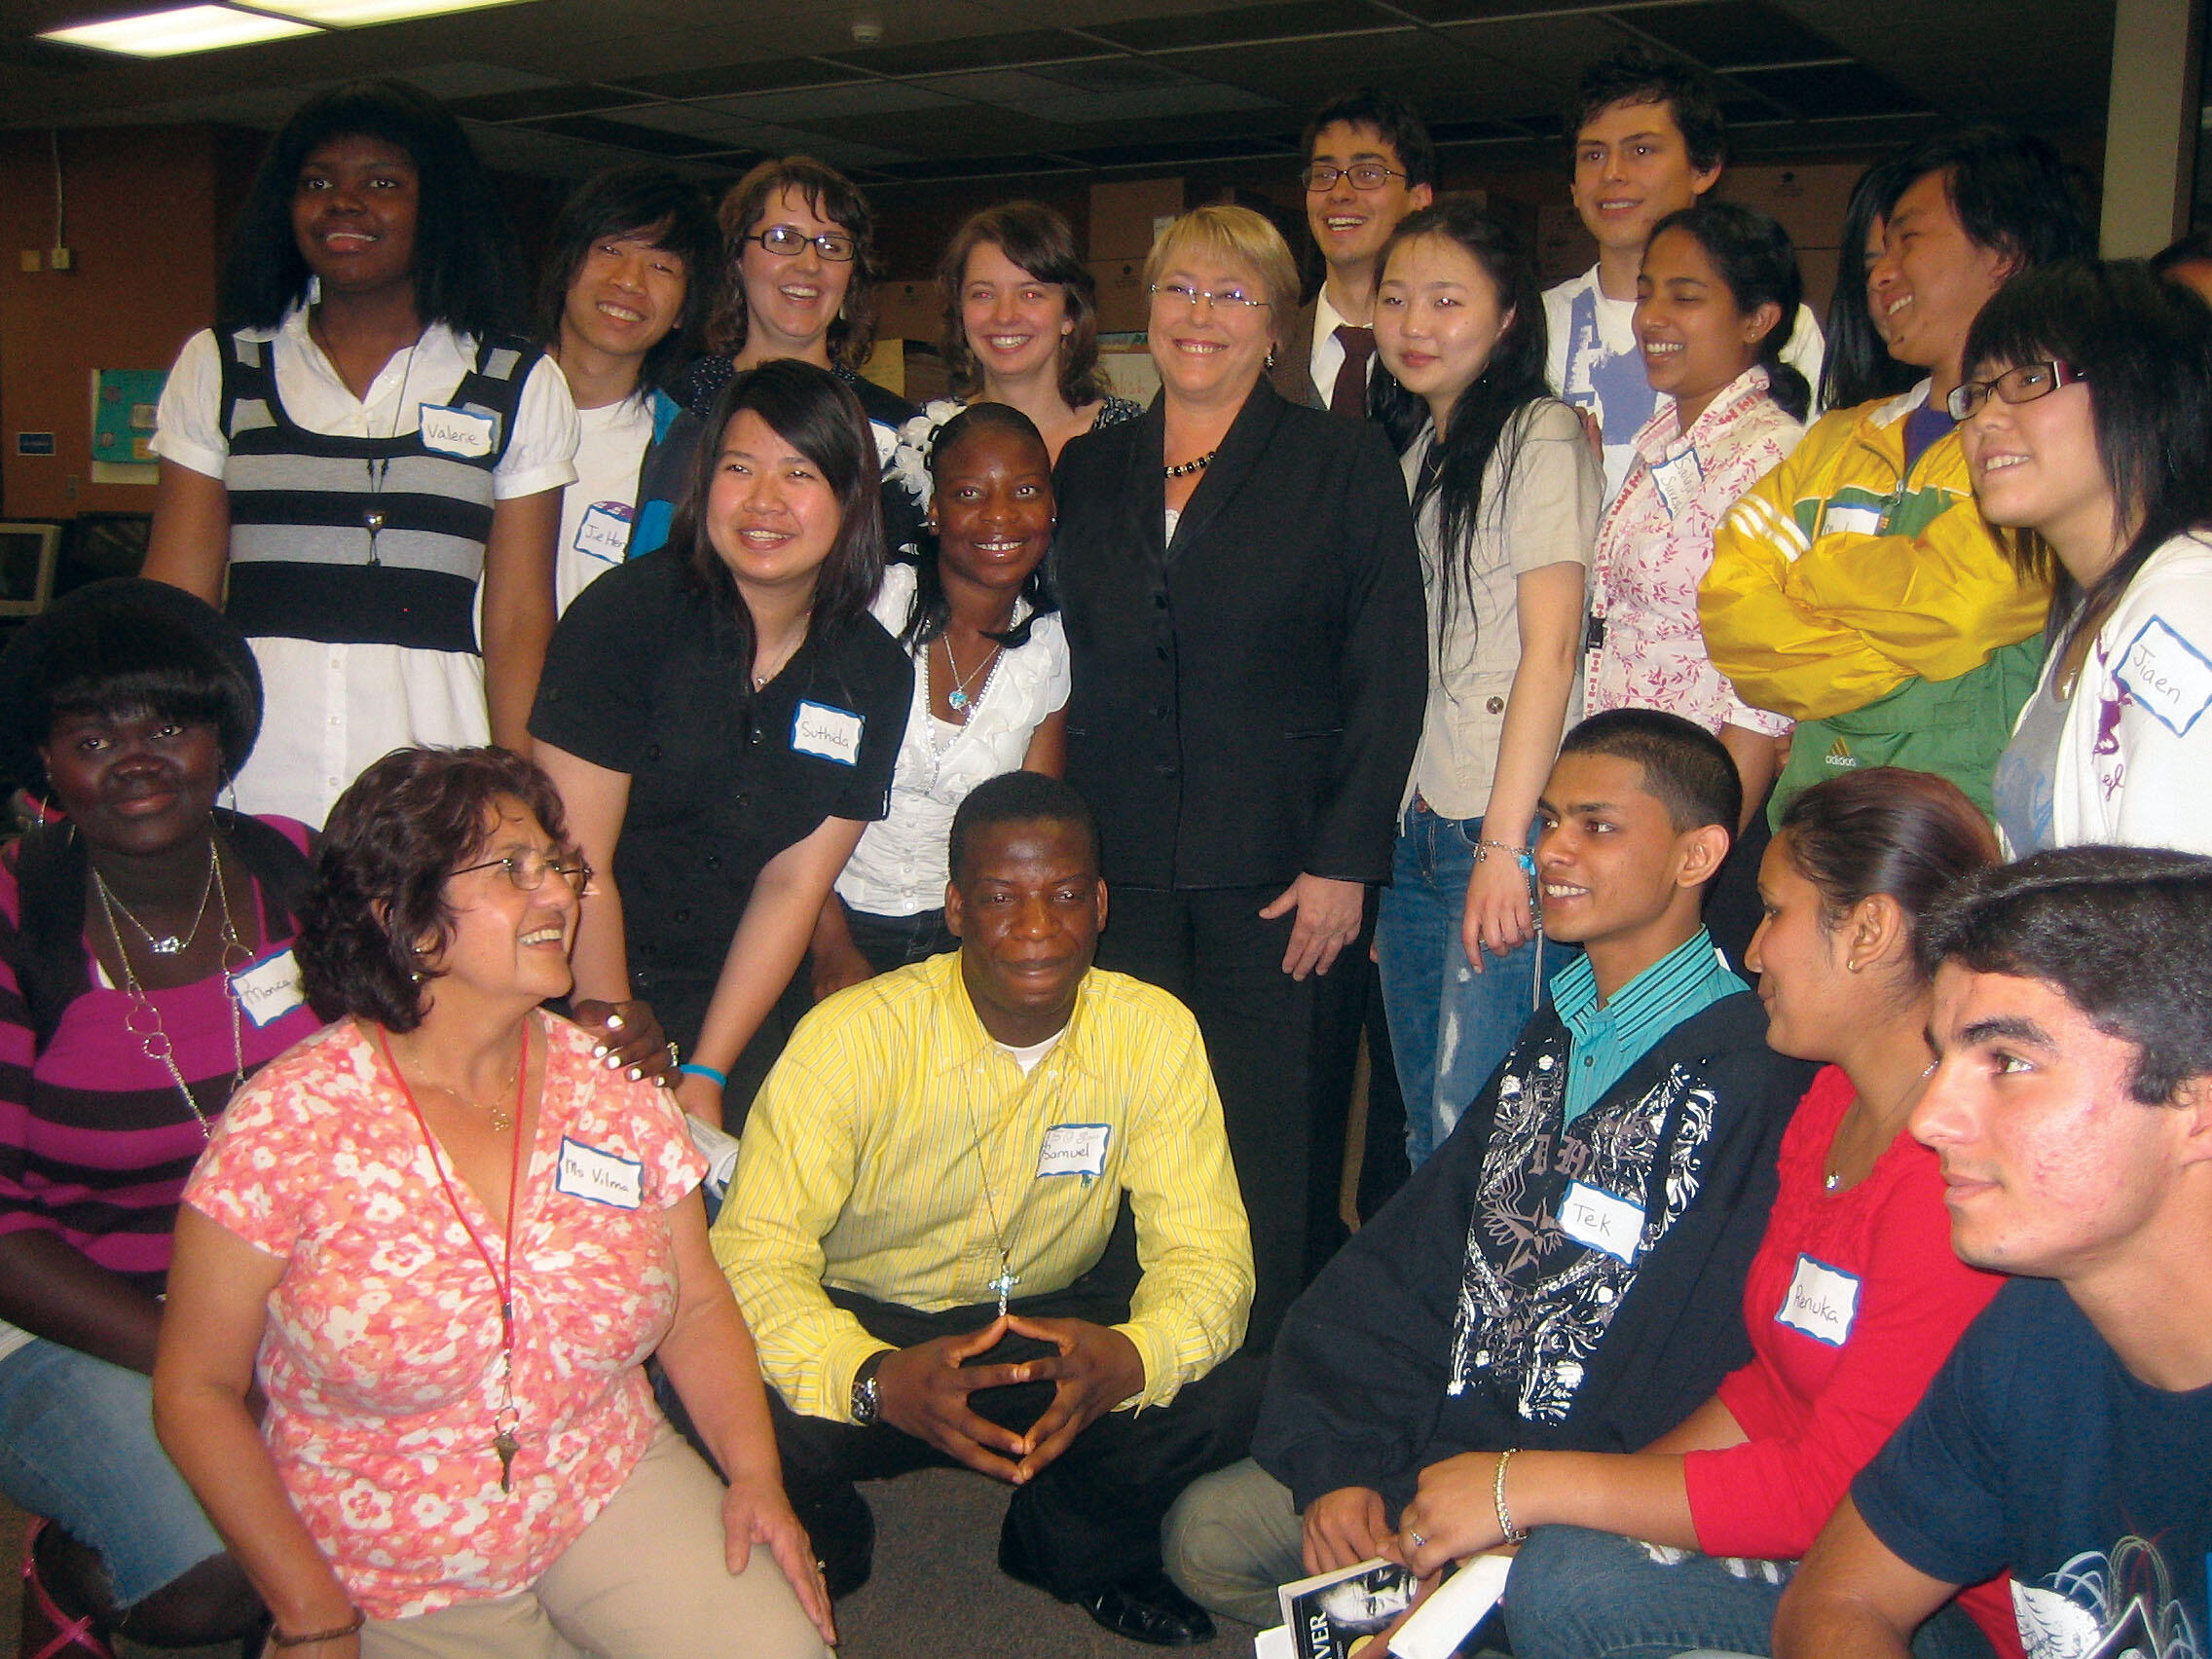 Michelle Bachelet with students from Oakland International High School during her visit there in 2010. (Photo courtesy of Oakland International High School.)